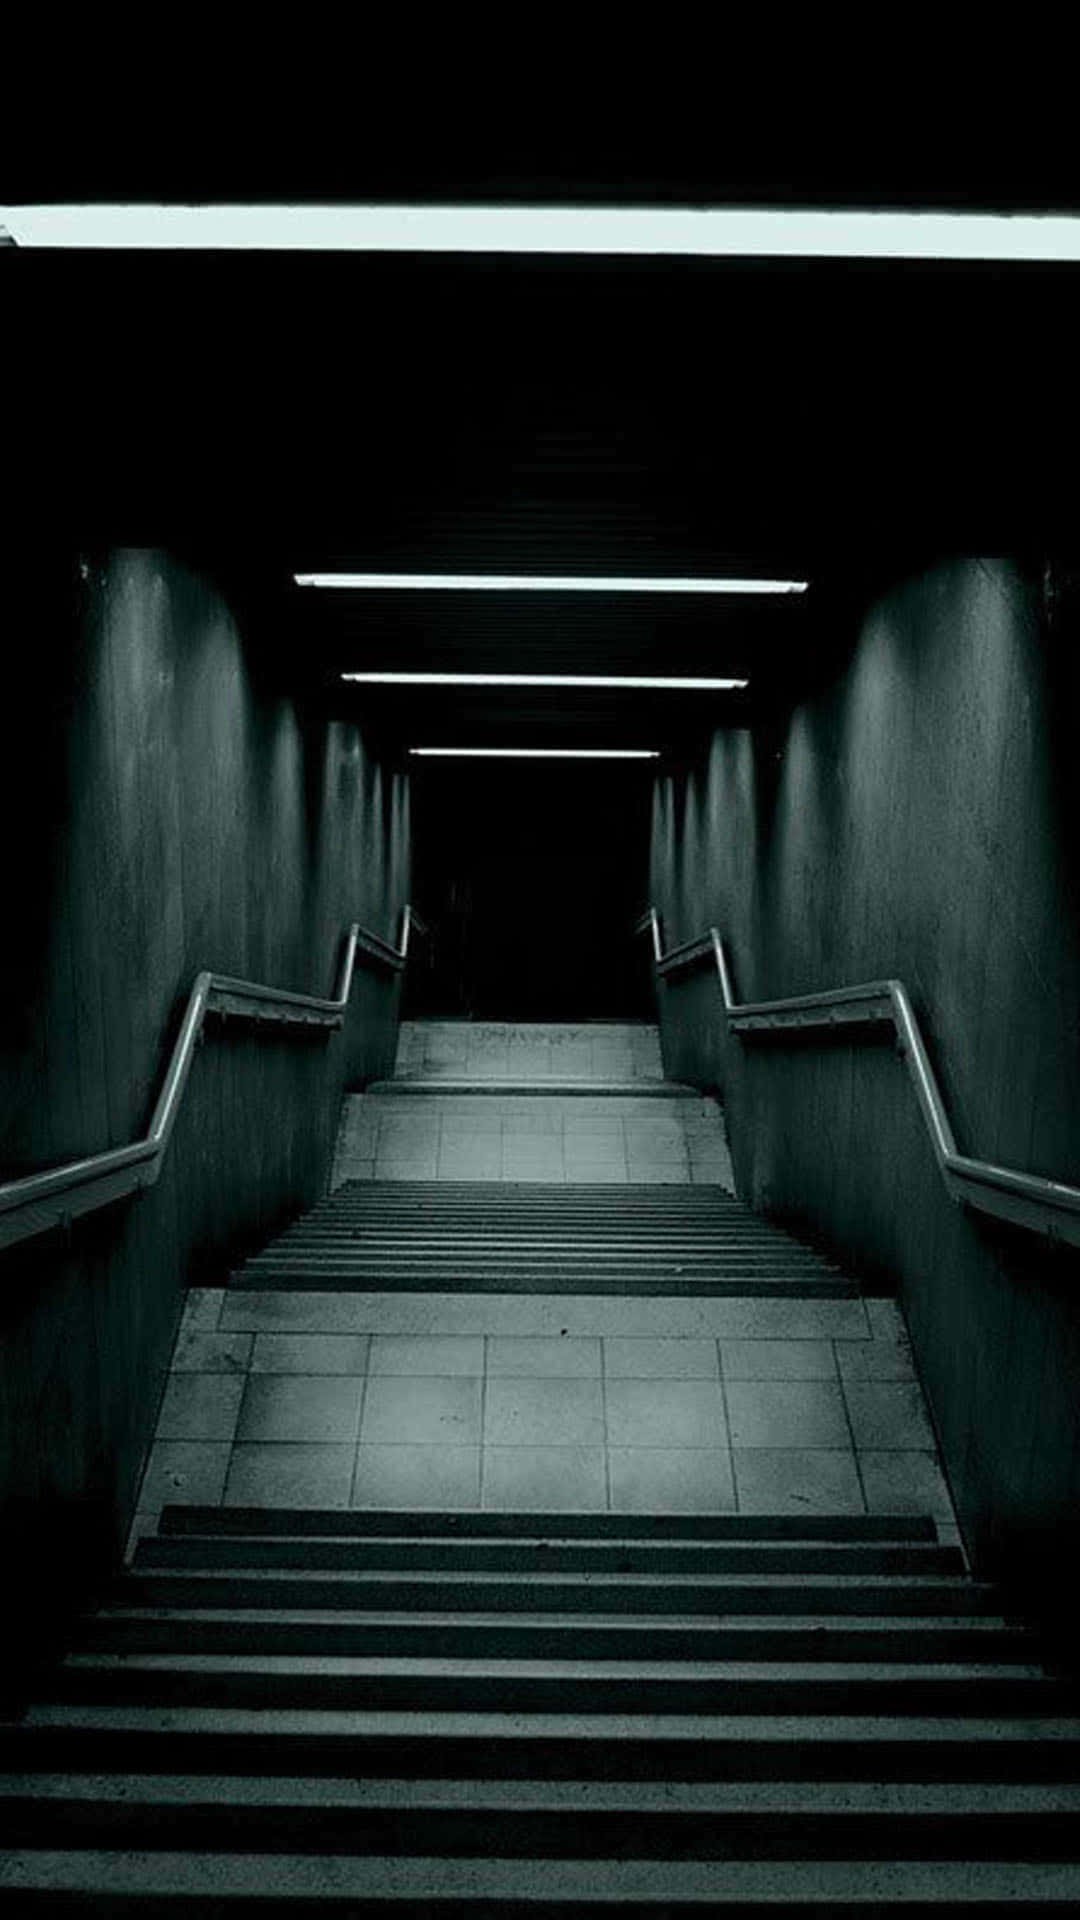 A Dark Hallway With Stairs And Lights